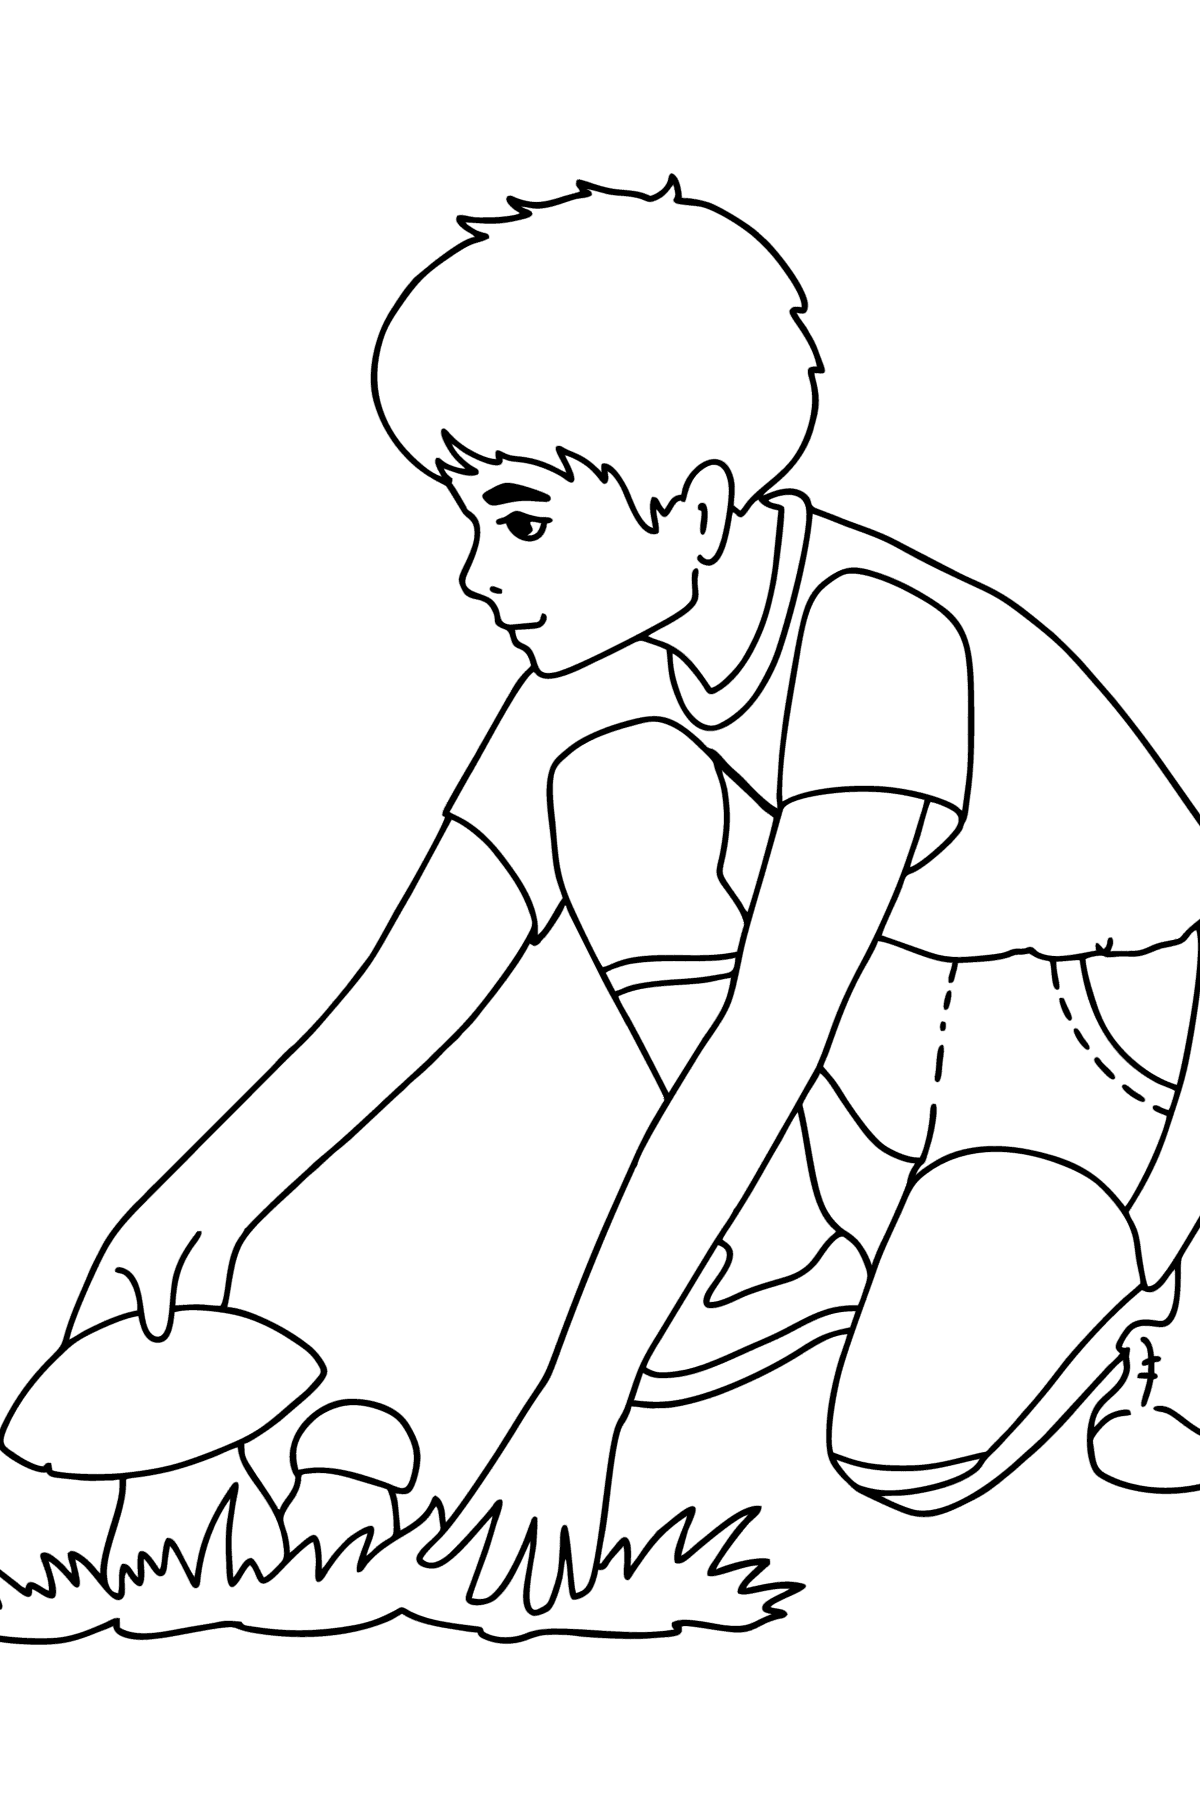 Boy picking mushrooms сoloring page - Coloring Pages for Kids